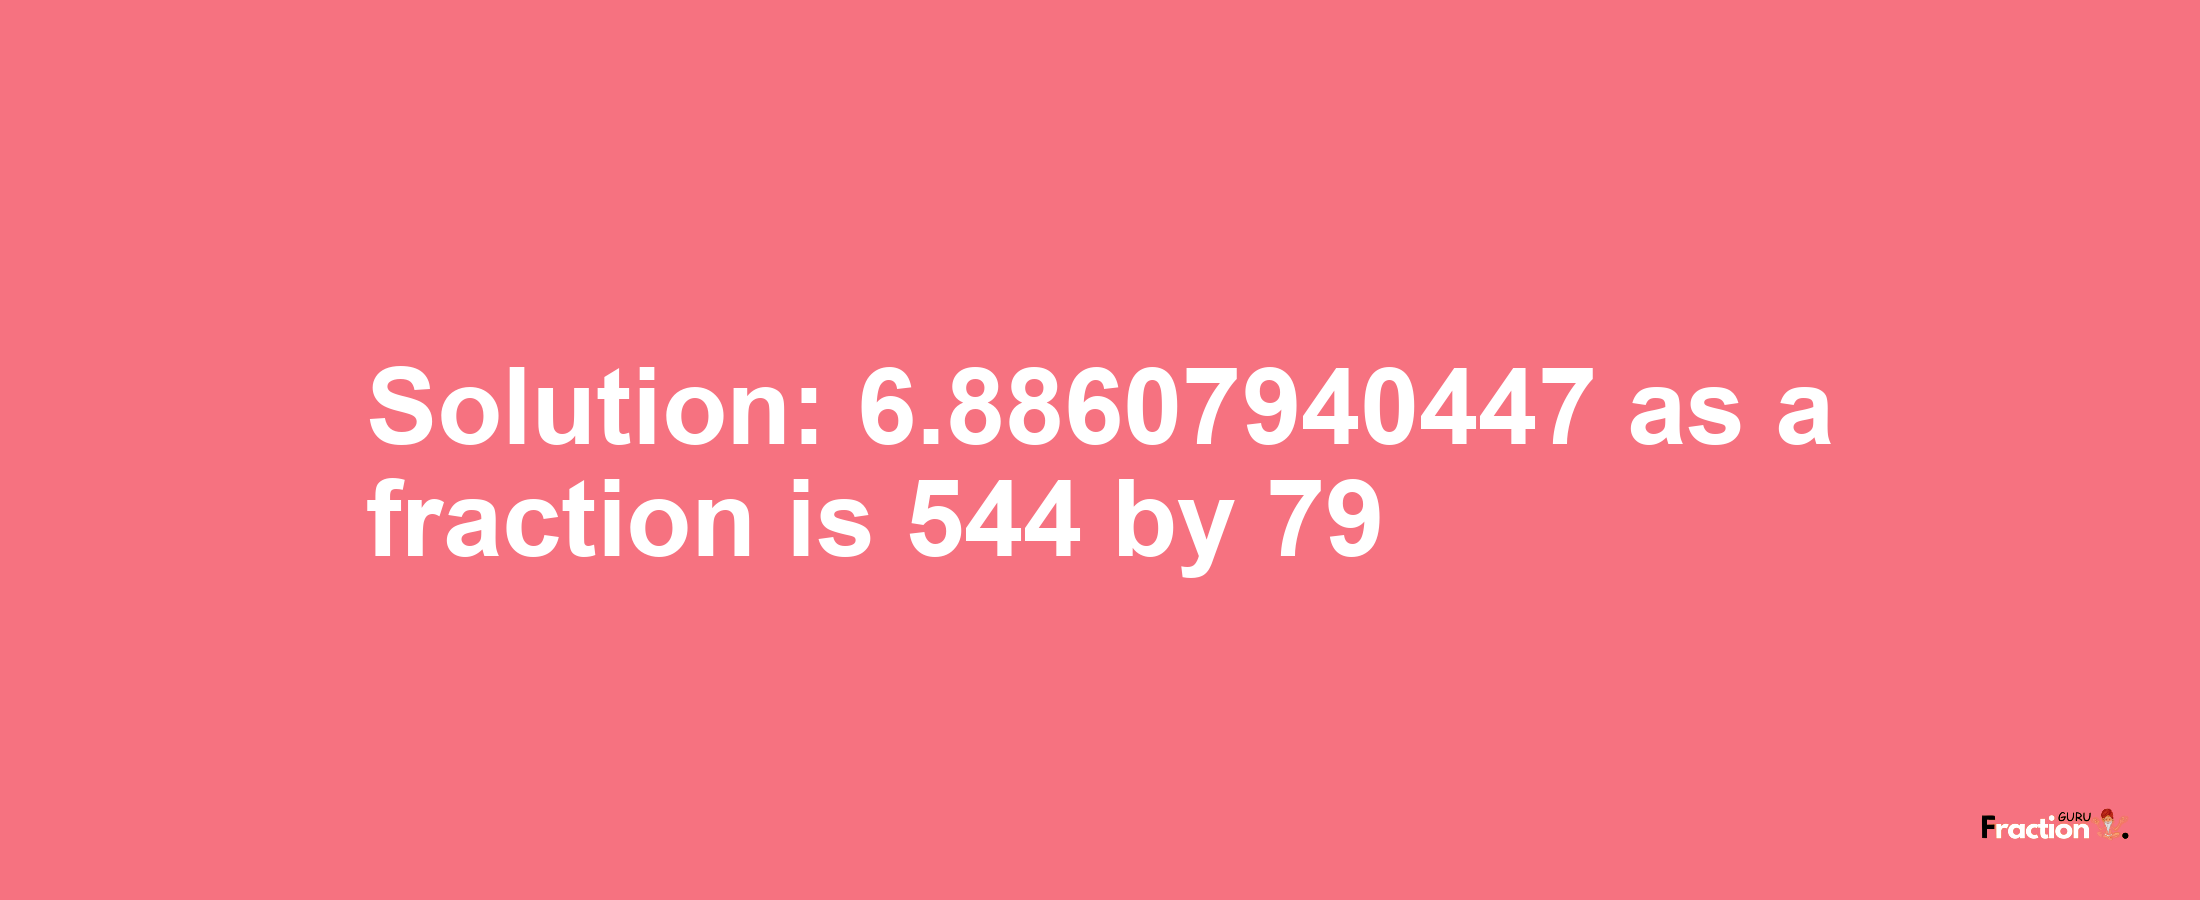 Solution:6.88607940447 as a fraction is 544/79